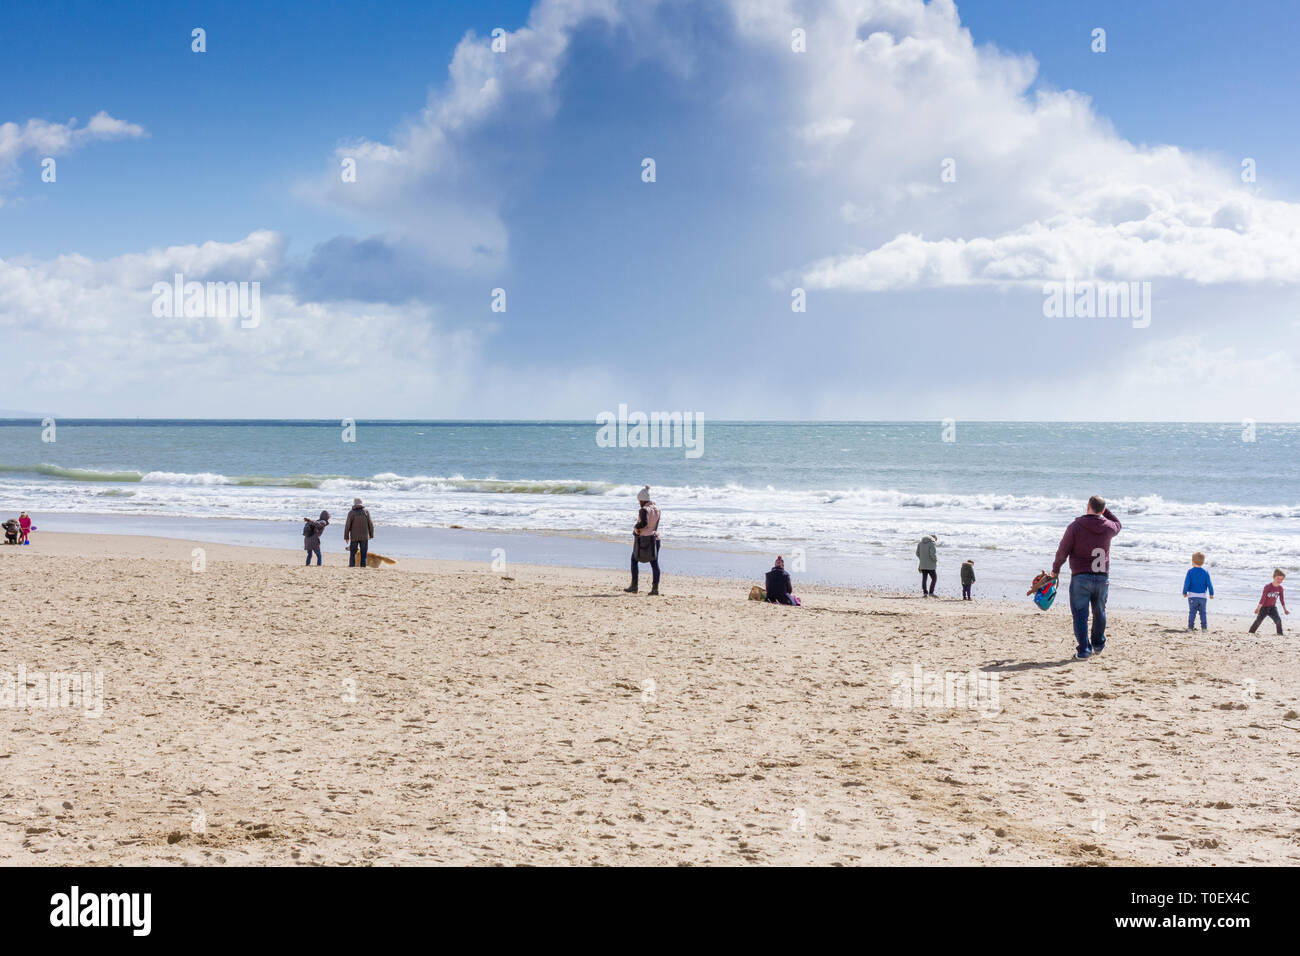 Bournemouth Beach on Sunday 17 March 2019. People out and about. Dorset, England, UK Stock Photo